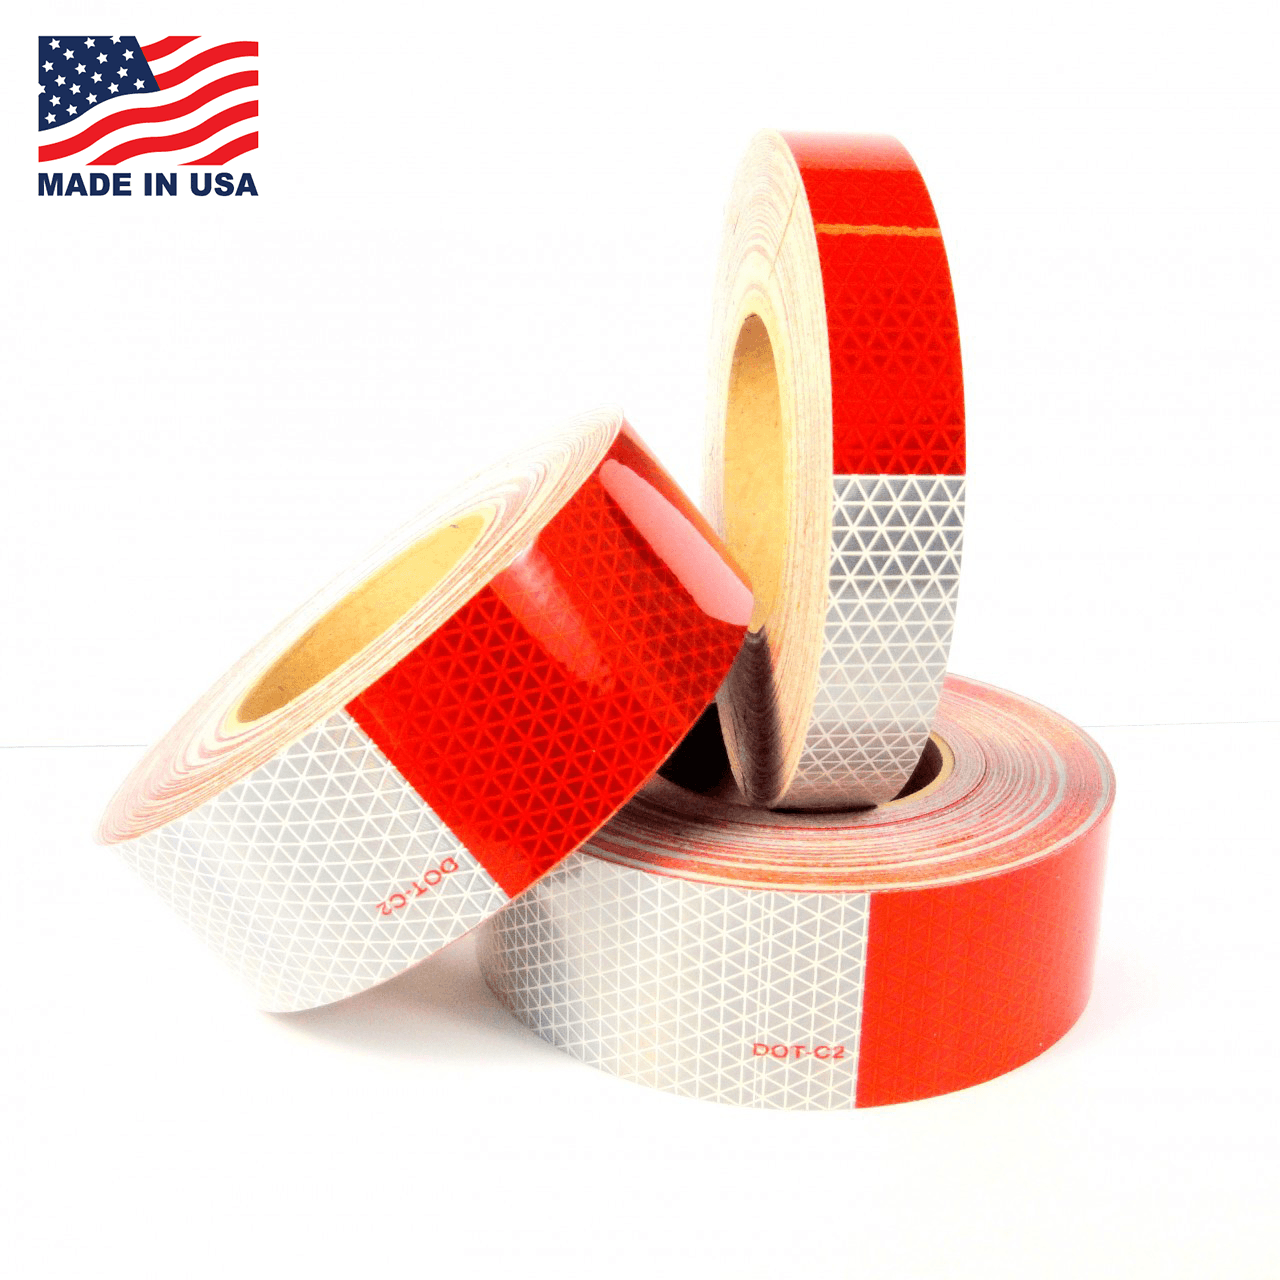 Metalized Tape, Metalized Polyester Tape - Wholesale